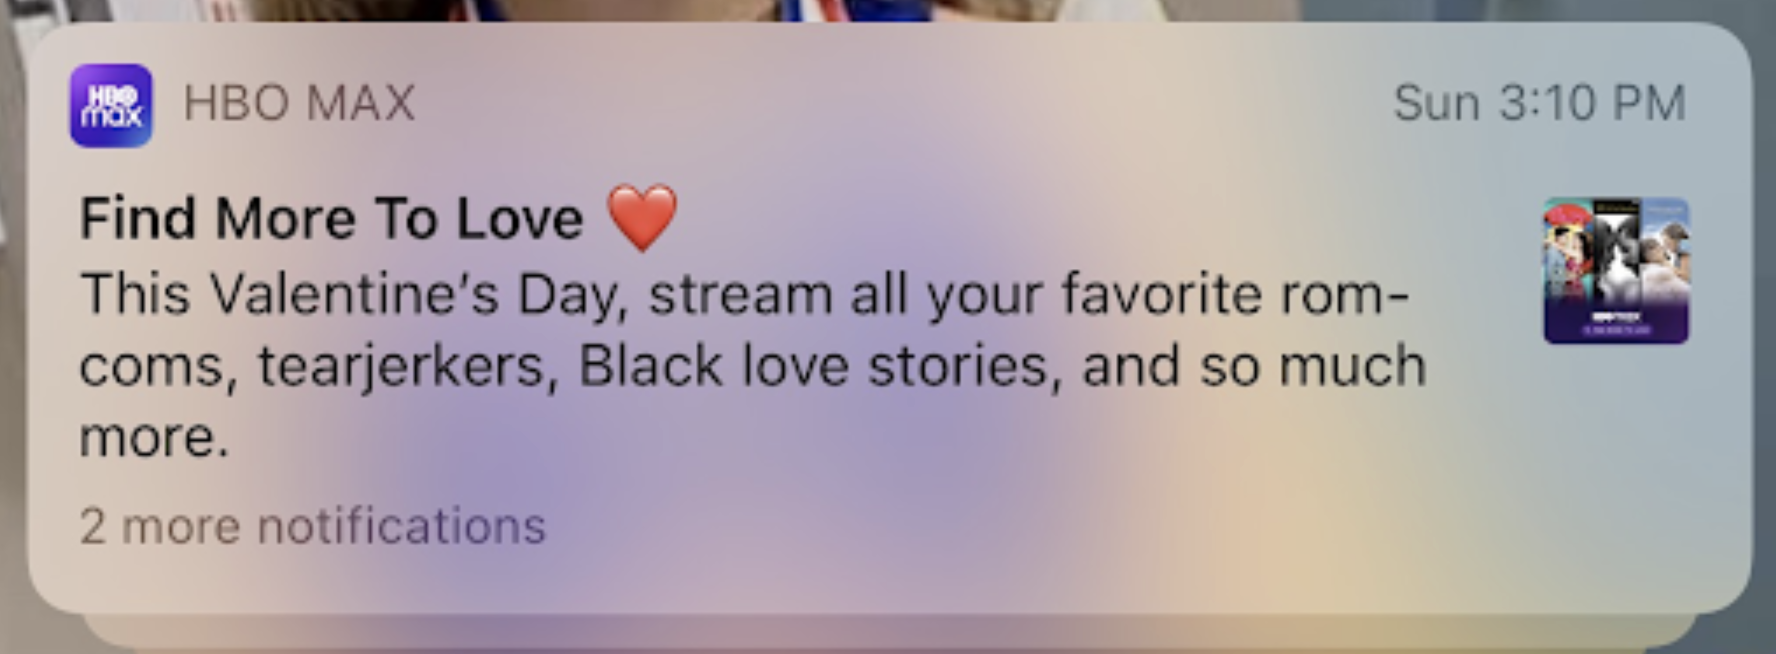 HBO Max Valentine's Day Push Notifications